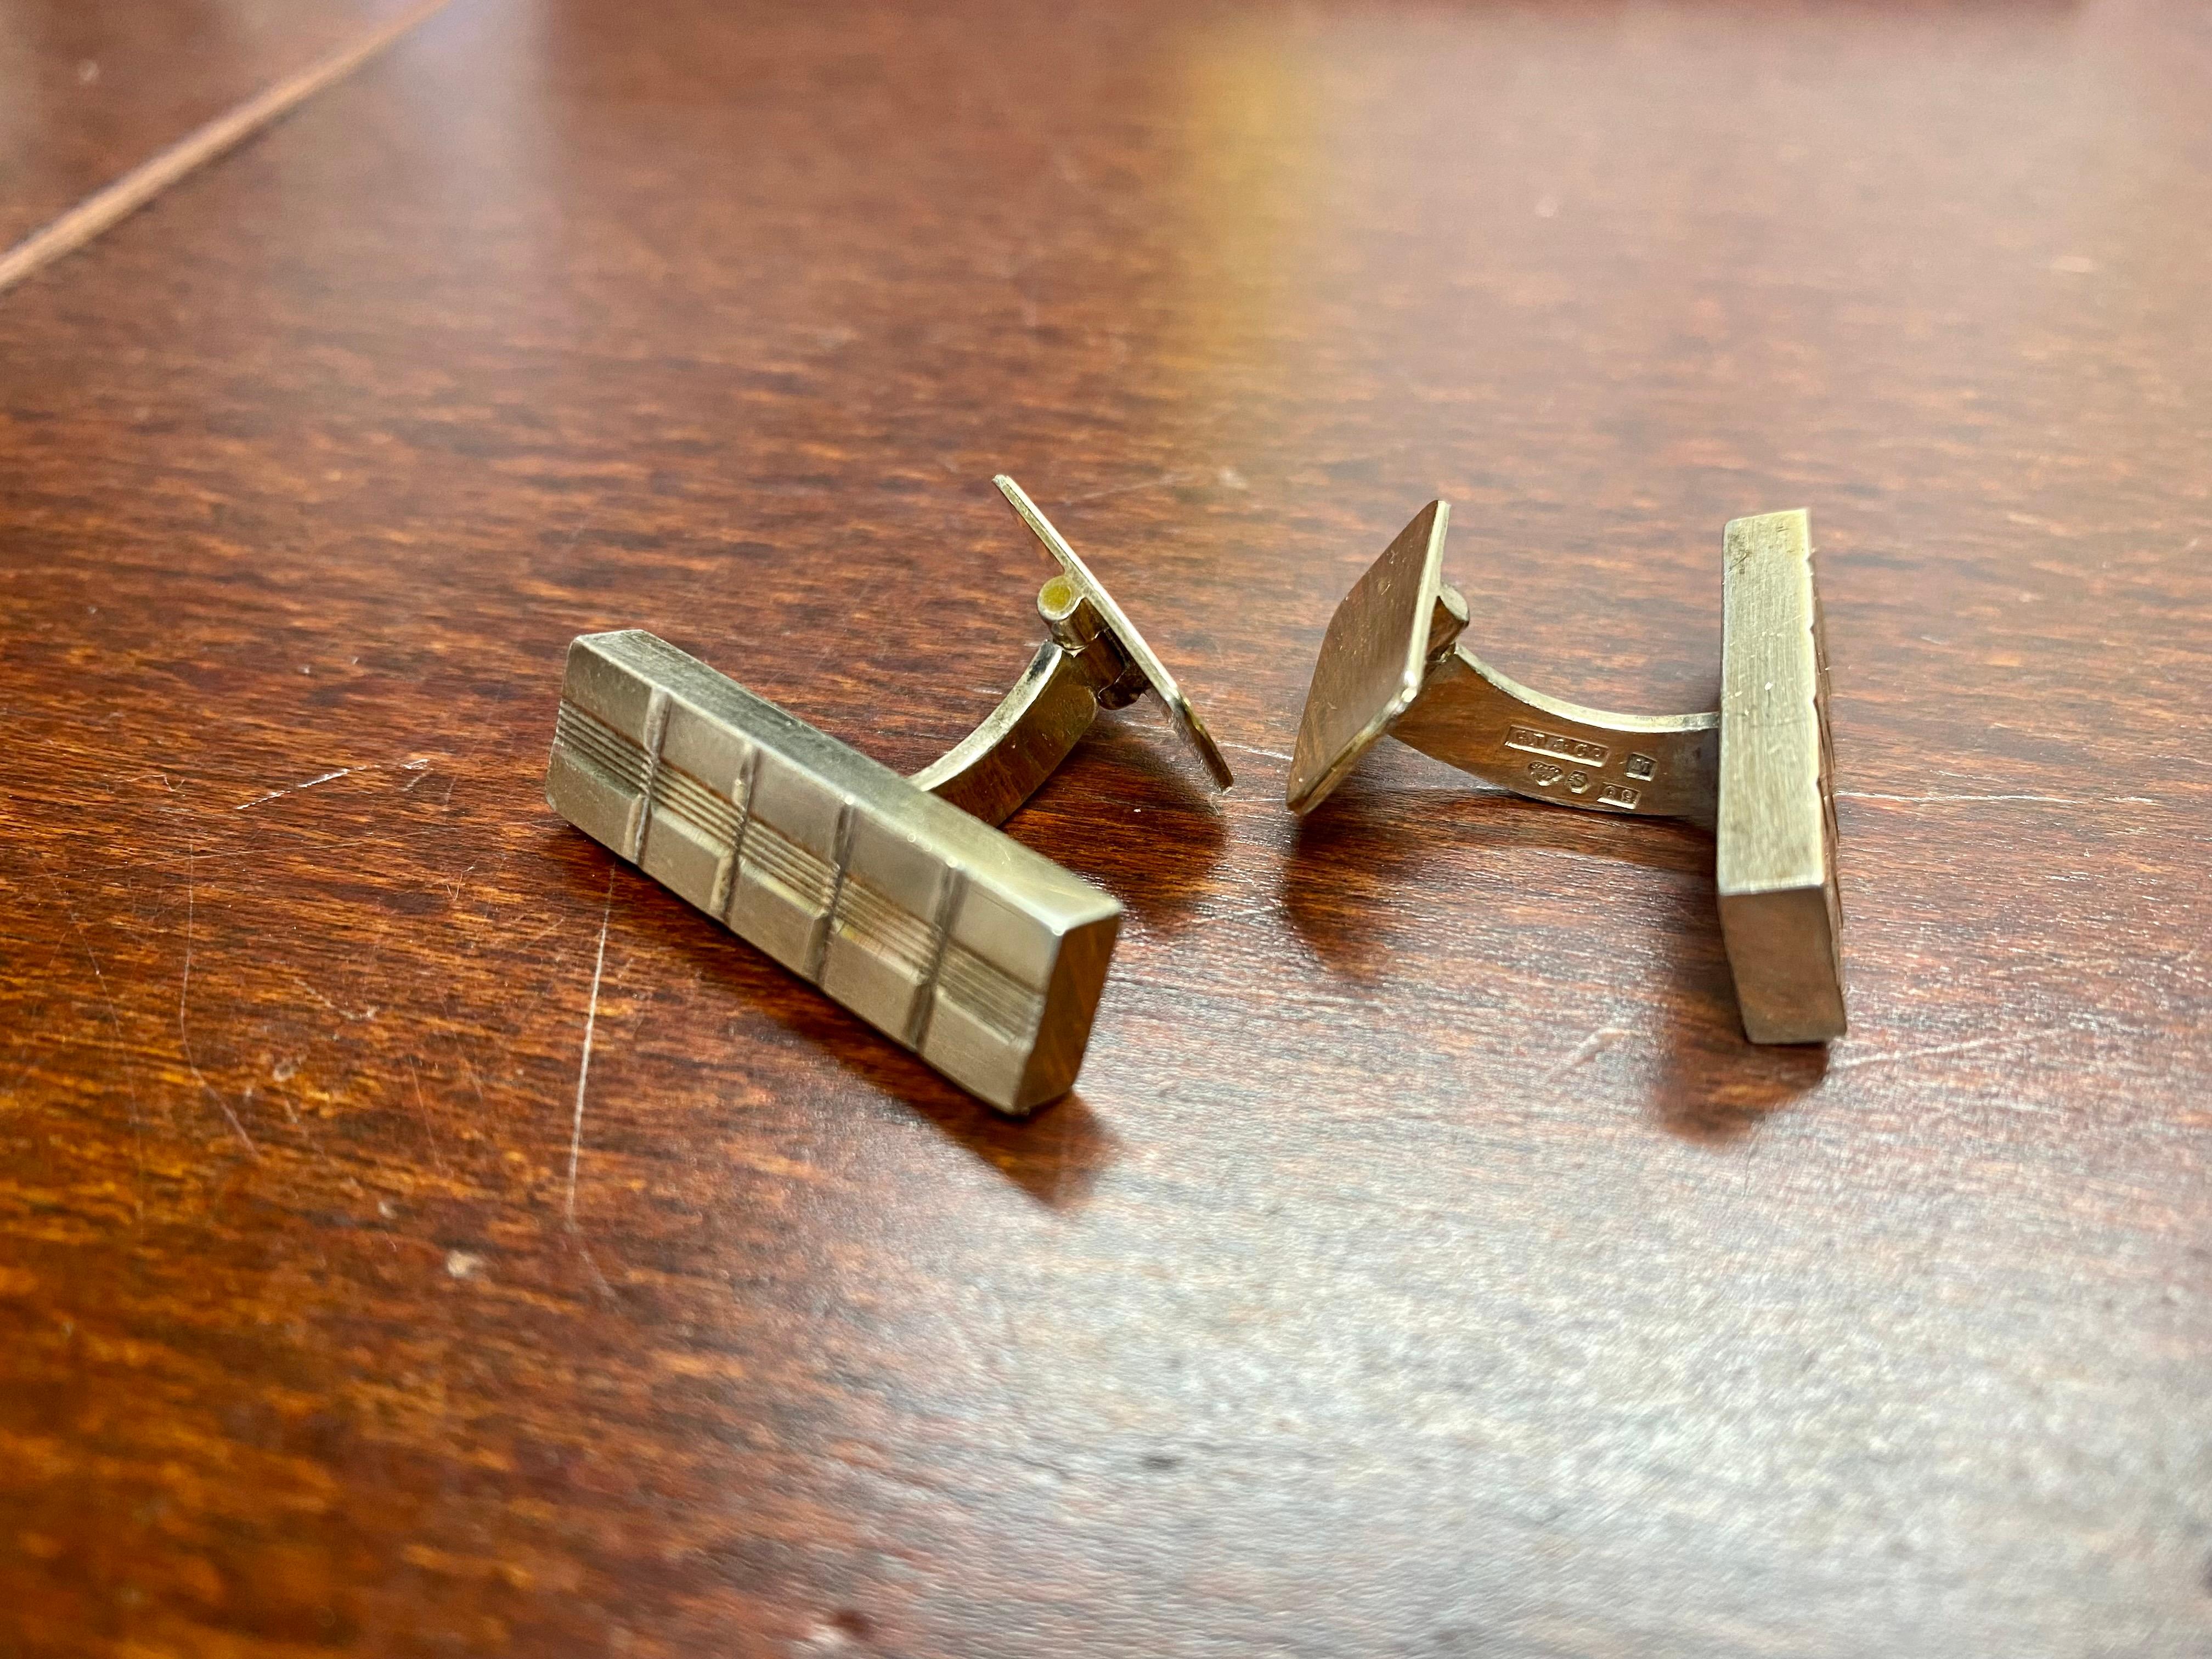 Pair of Gilded Silver Cufflinks from Gustaf Dahlgren & Co 1967
Really great.
Weight 23.8g.
Looks like heavy gold bars.
Made in Sweden.